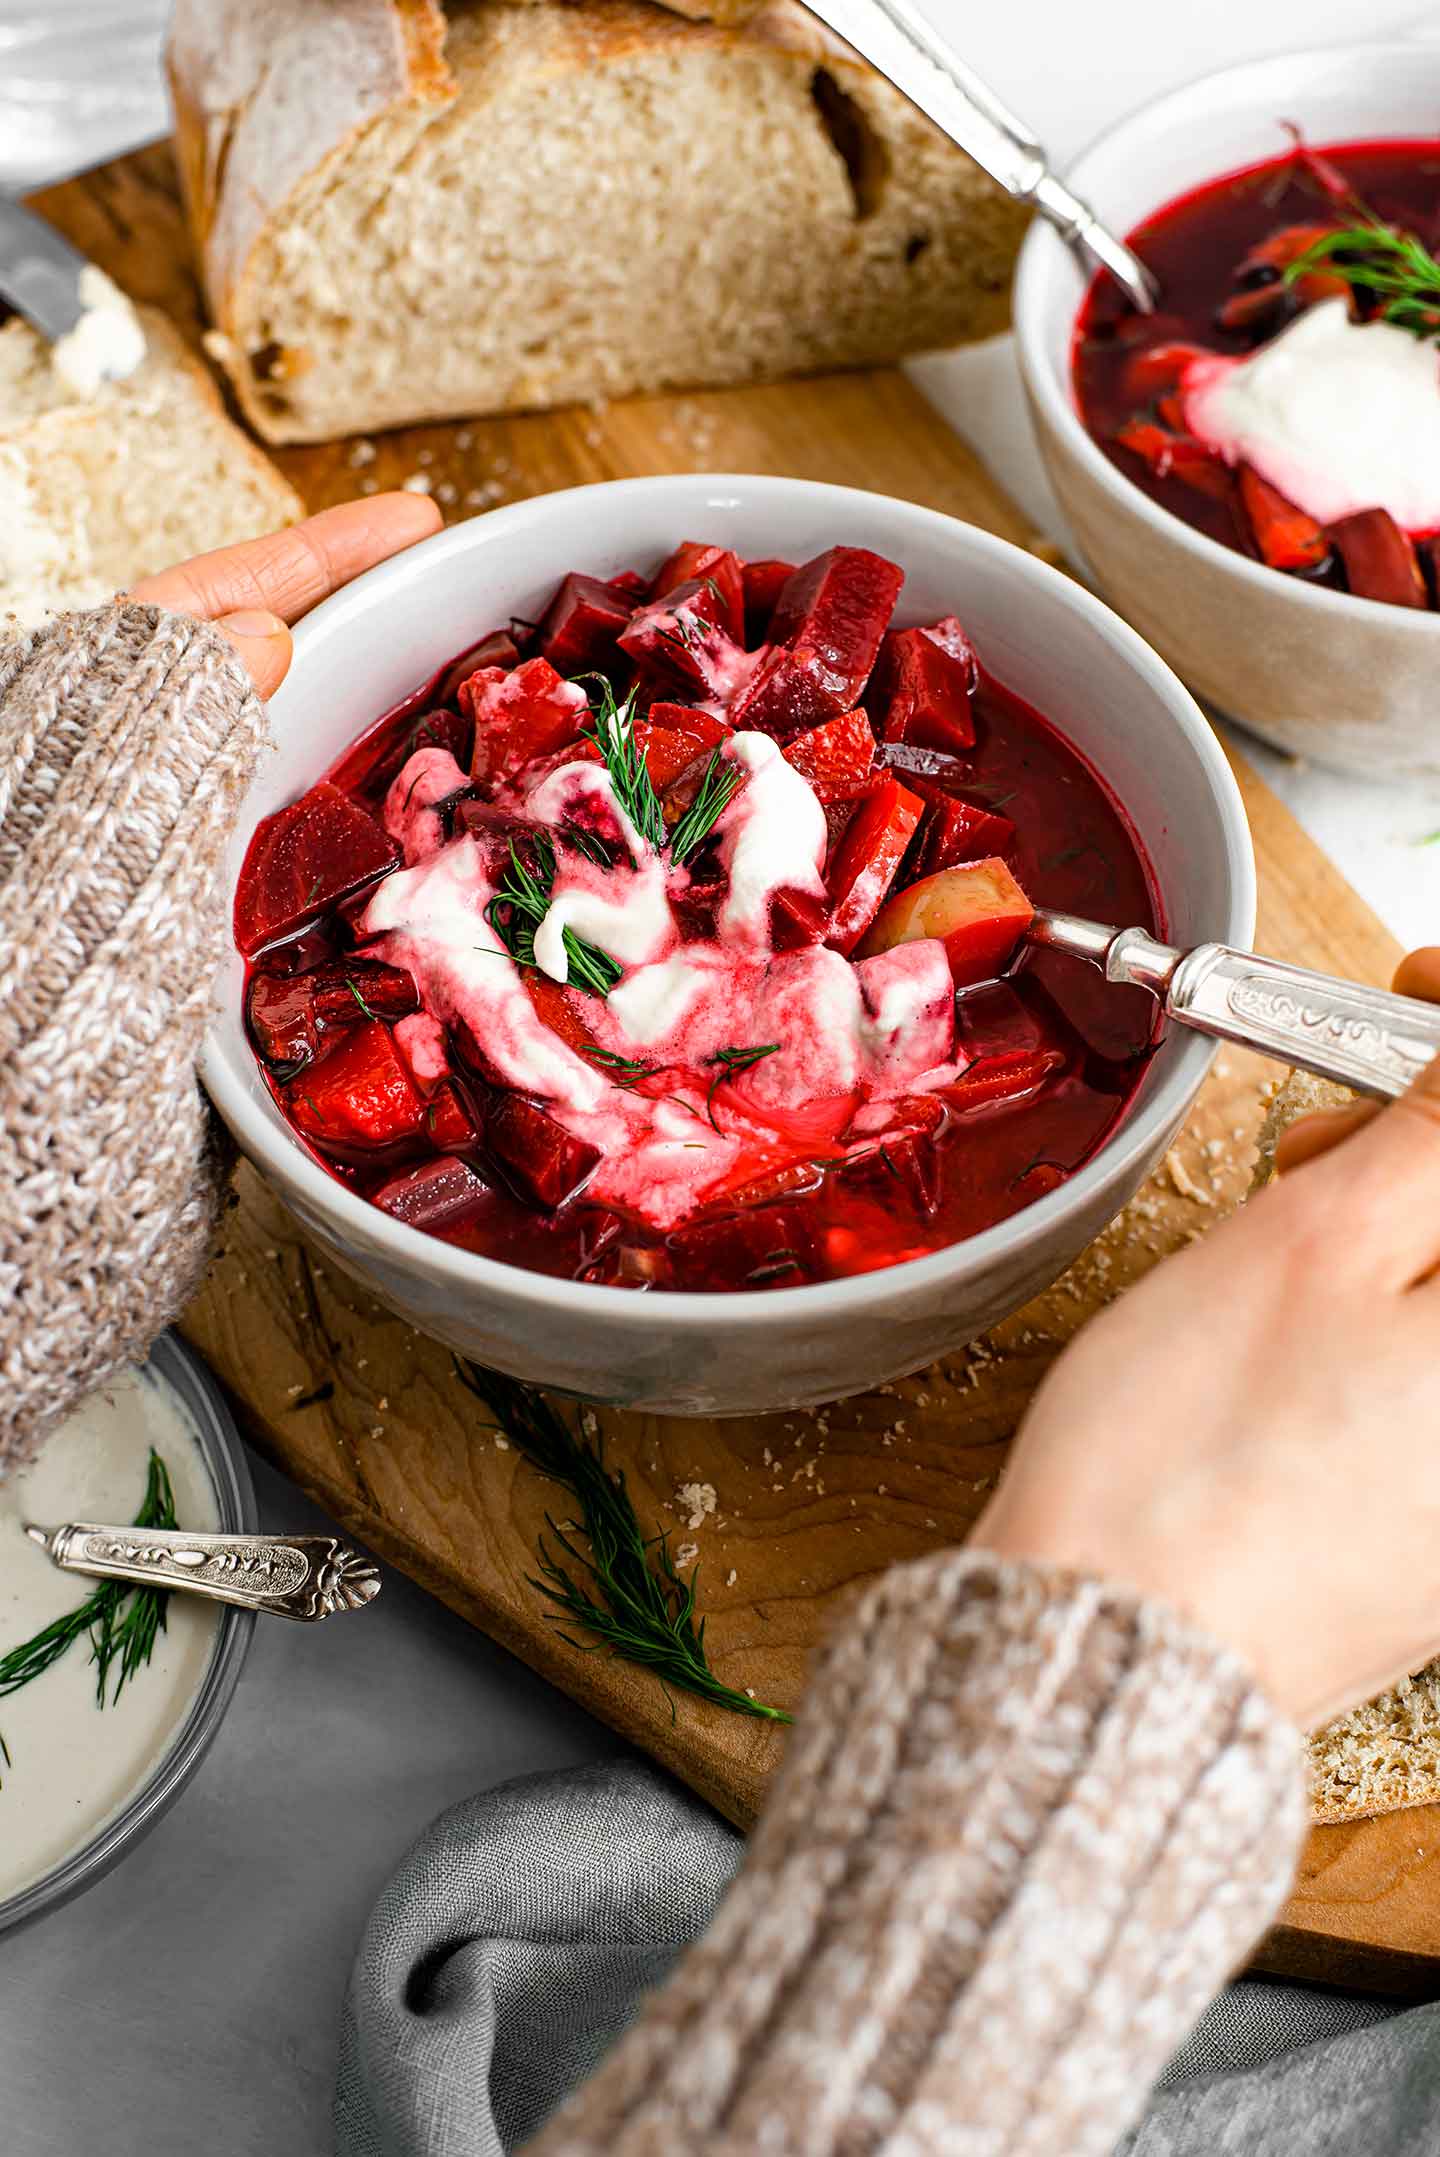 Side view of two hands wrapped around a big bowl of hearty borscht. A spoon lifts the chunky beets, potatoes, and carrots. Another bowl is in the background with a loaf of fresh bread. Sour cream and dill garnish the soup.